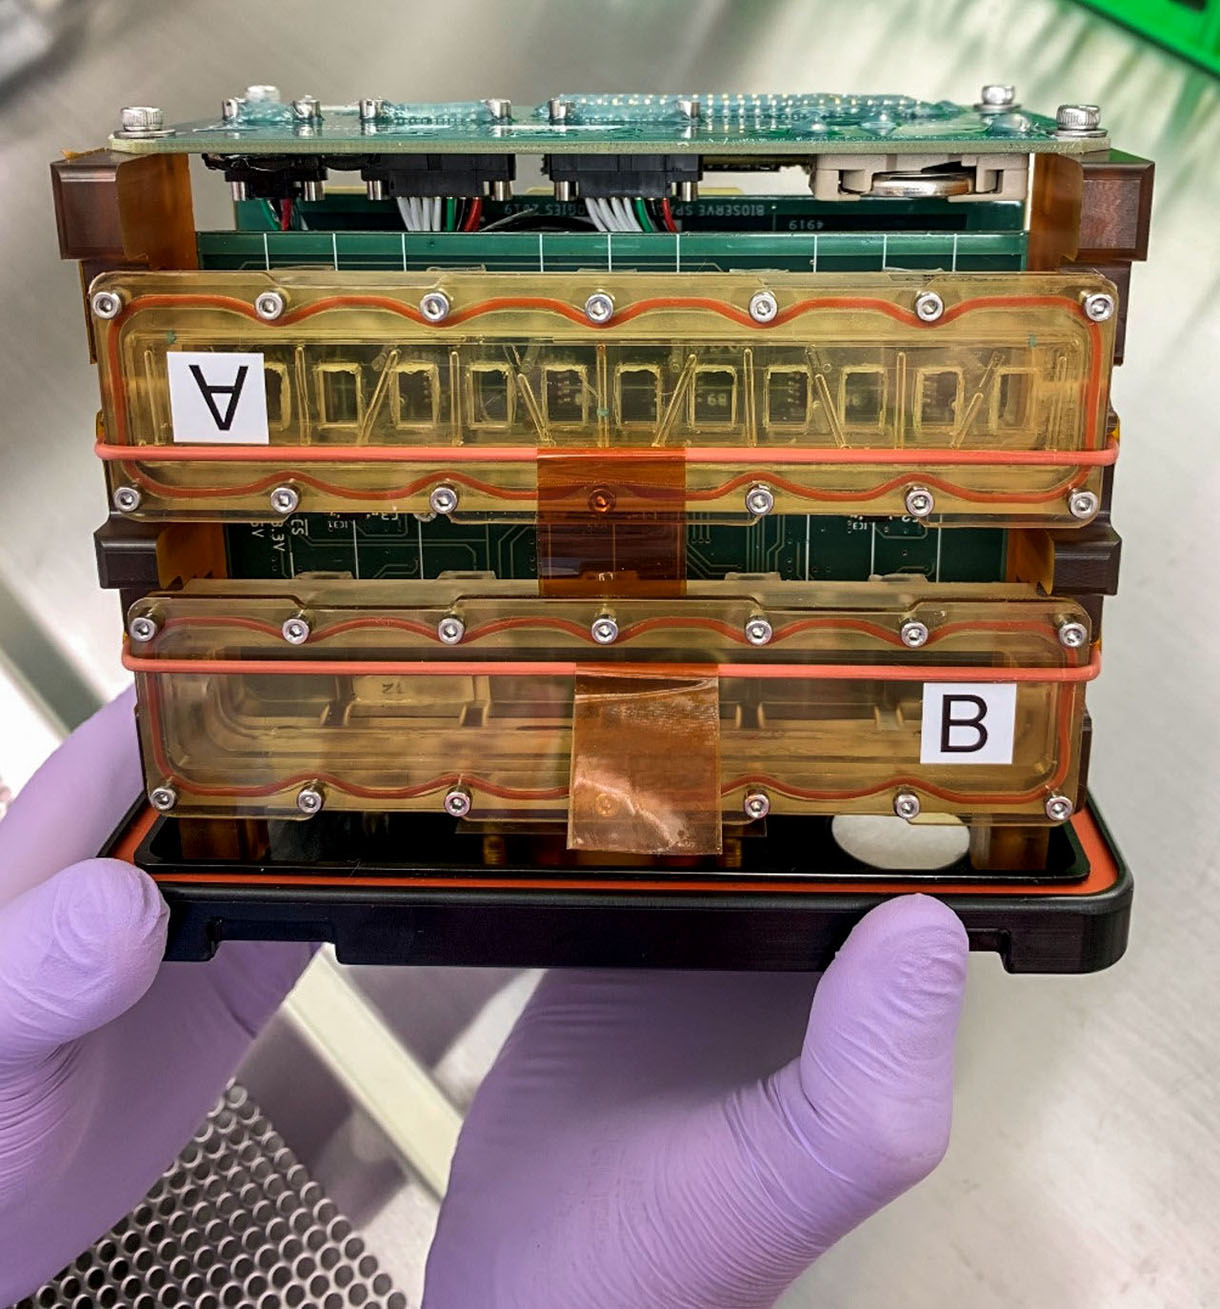 "Researchers launch heart tissue to the International Space Station to help cardiac patients on Earth; Tissue chambers loaded into a plate habitat designed for research aboard the ISS. Photo: Deok-Ho Kim and Devin Mair, Johns Hopkins Medicine."